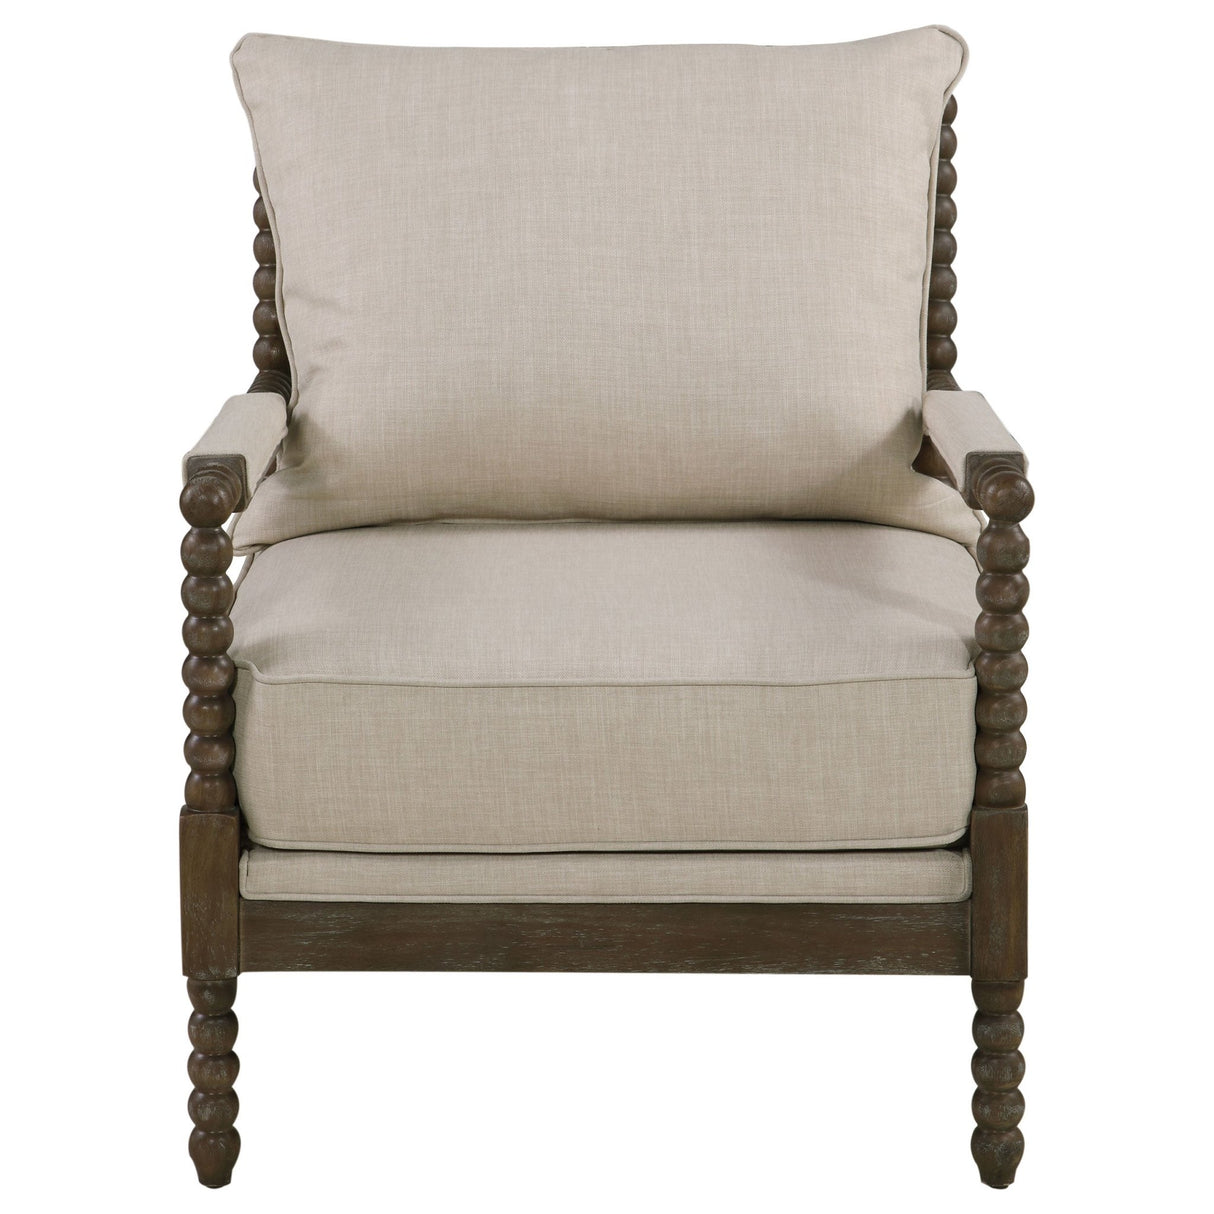 Accent Chair - Blanchett Cushion Back Accent Chair Beige and Natural - Accent Chairs - 905362 - image - 3